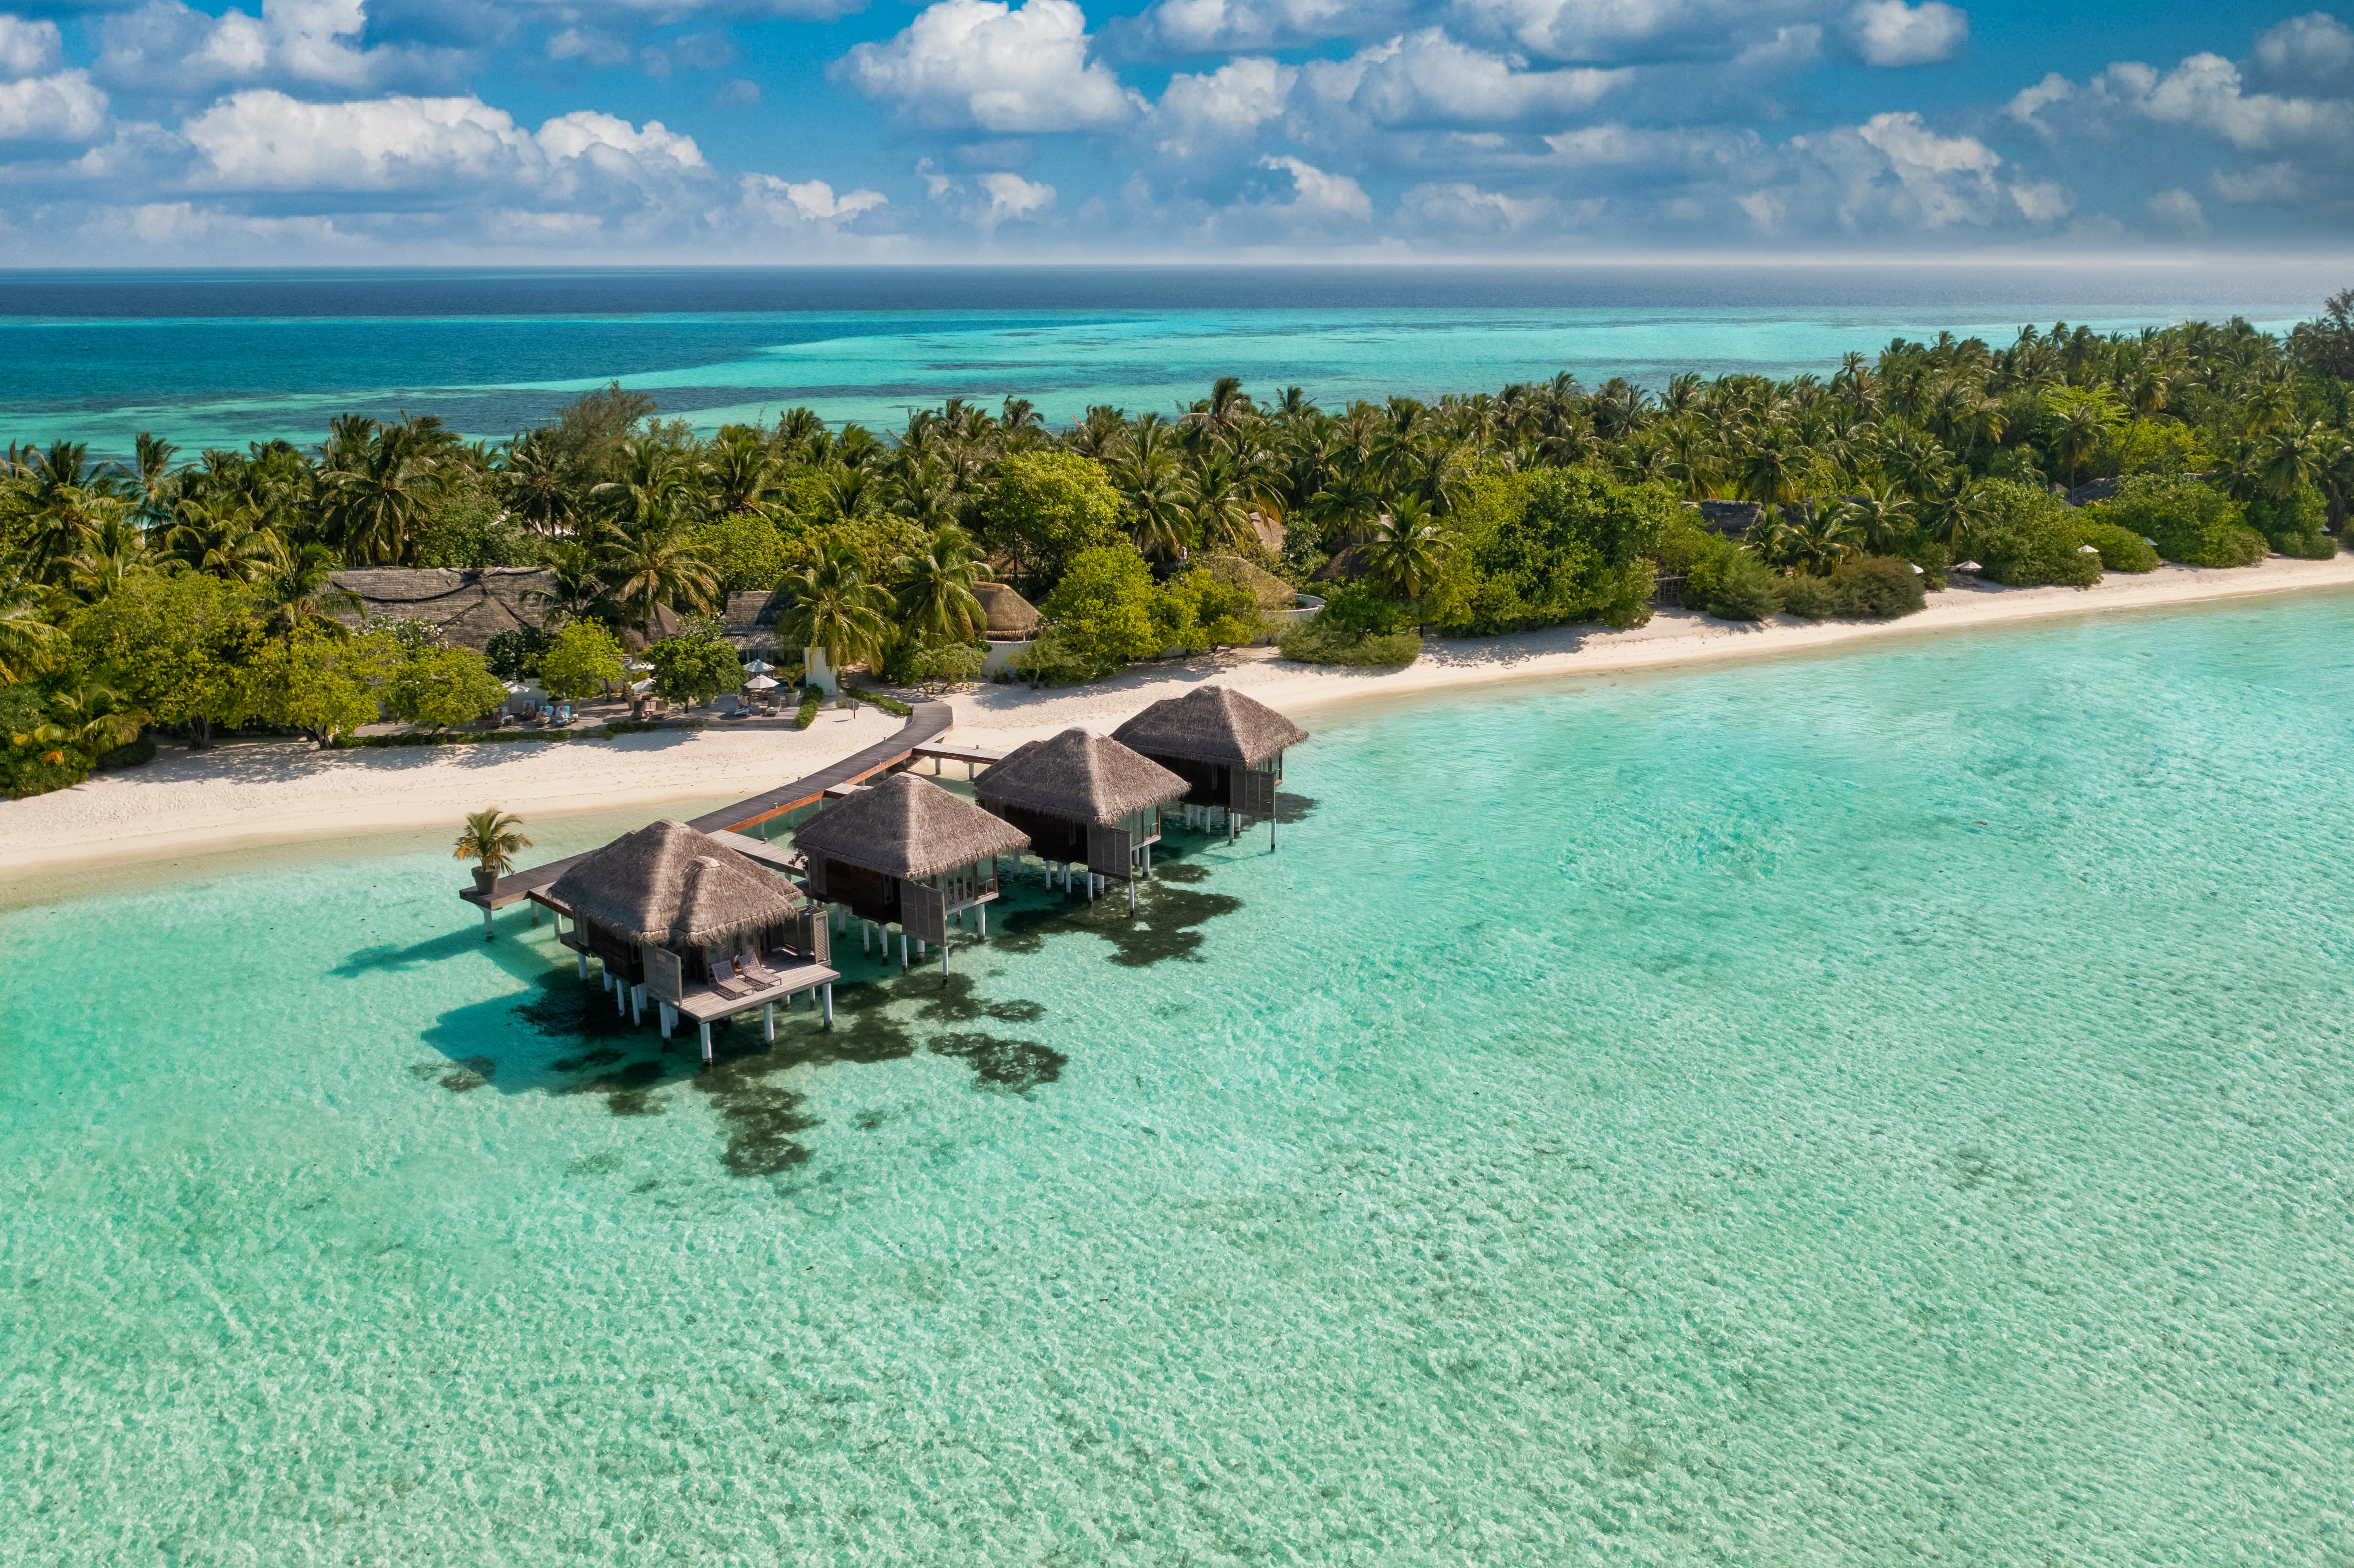 Maldives paradise scenery. Tropical aerial landscape, seascape with long jetty, water villas with amazing sea and lagoon beach, tropical nature. Exotic tourism destination banner, summer vacation | Source: Getty Images